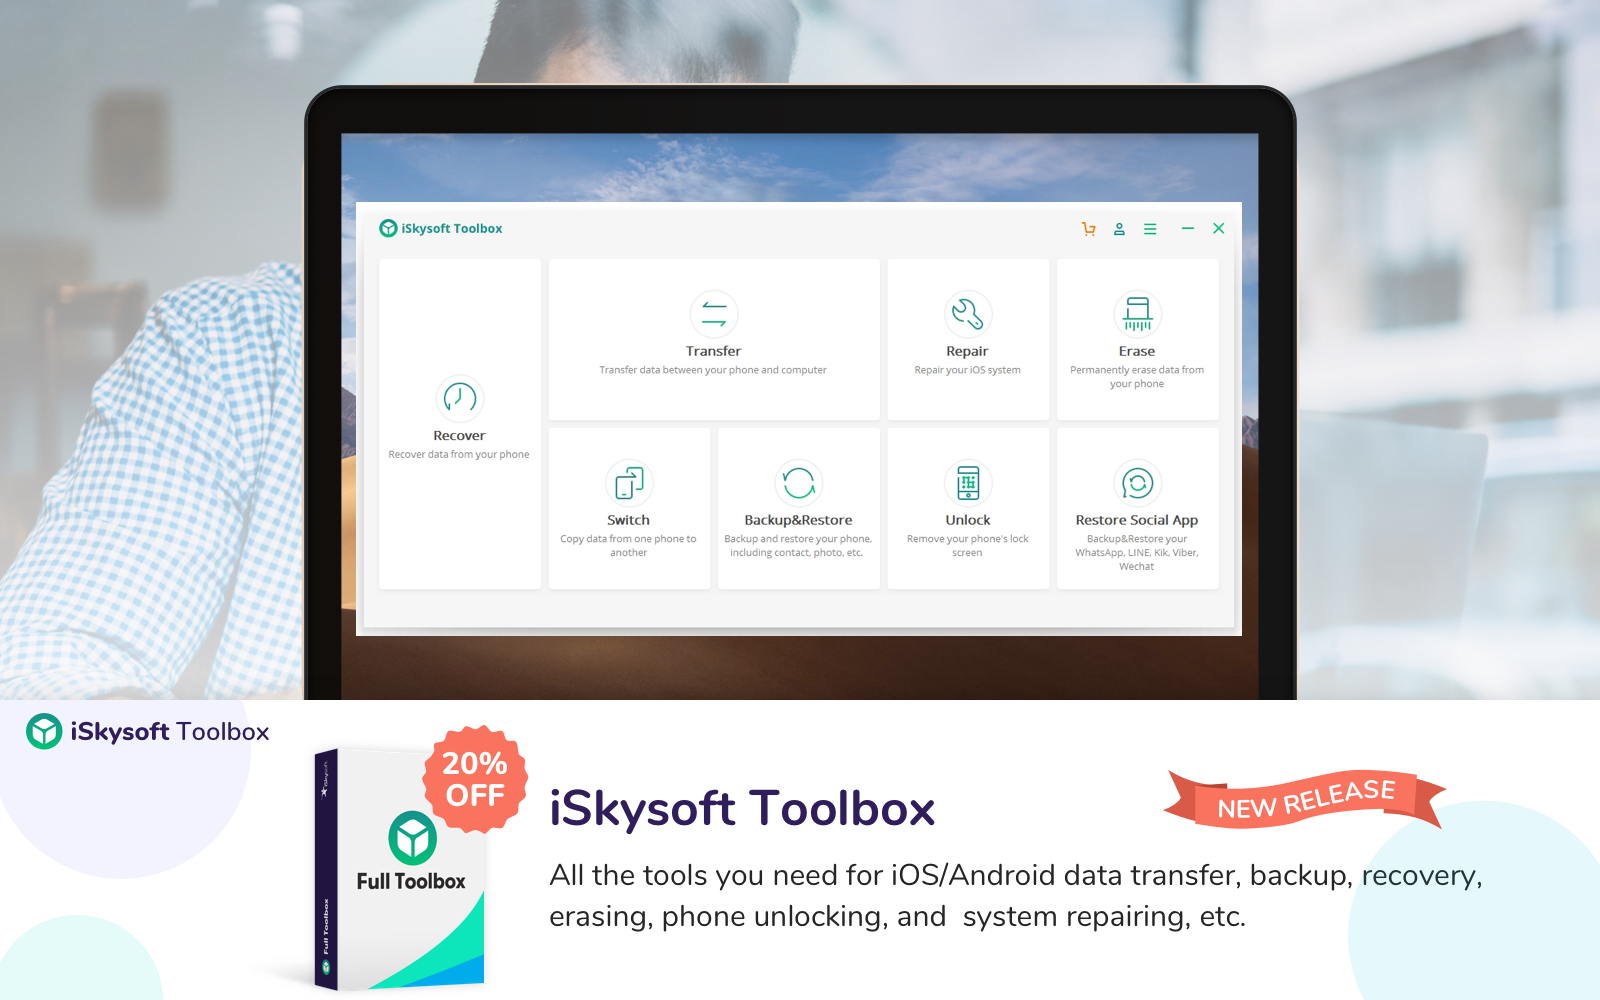 If you need to deal with data on iOS or Android devices, iSkysoft Toolbox can help.